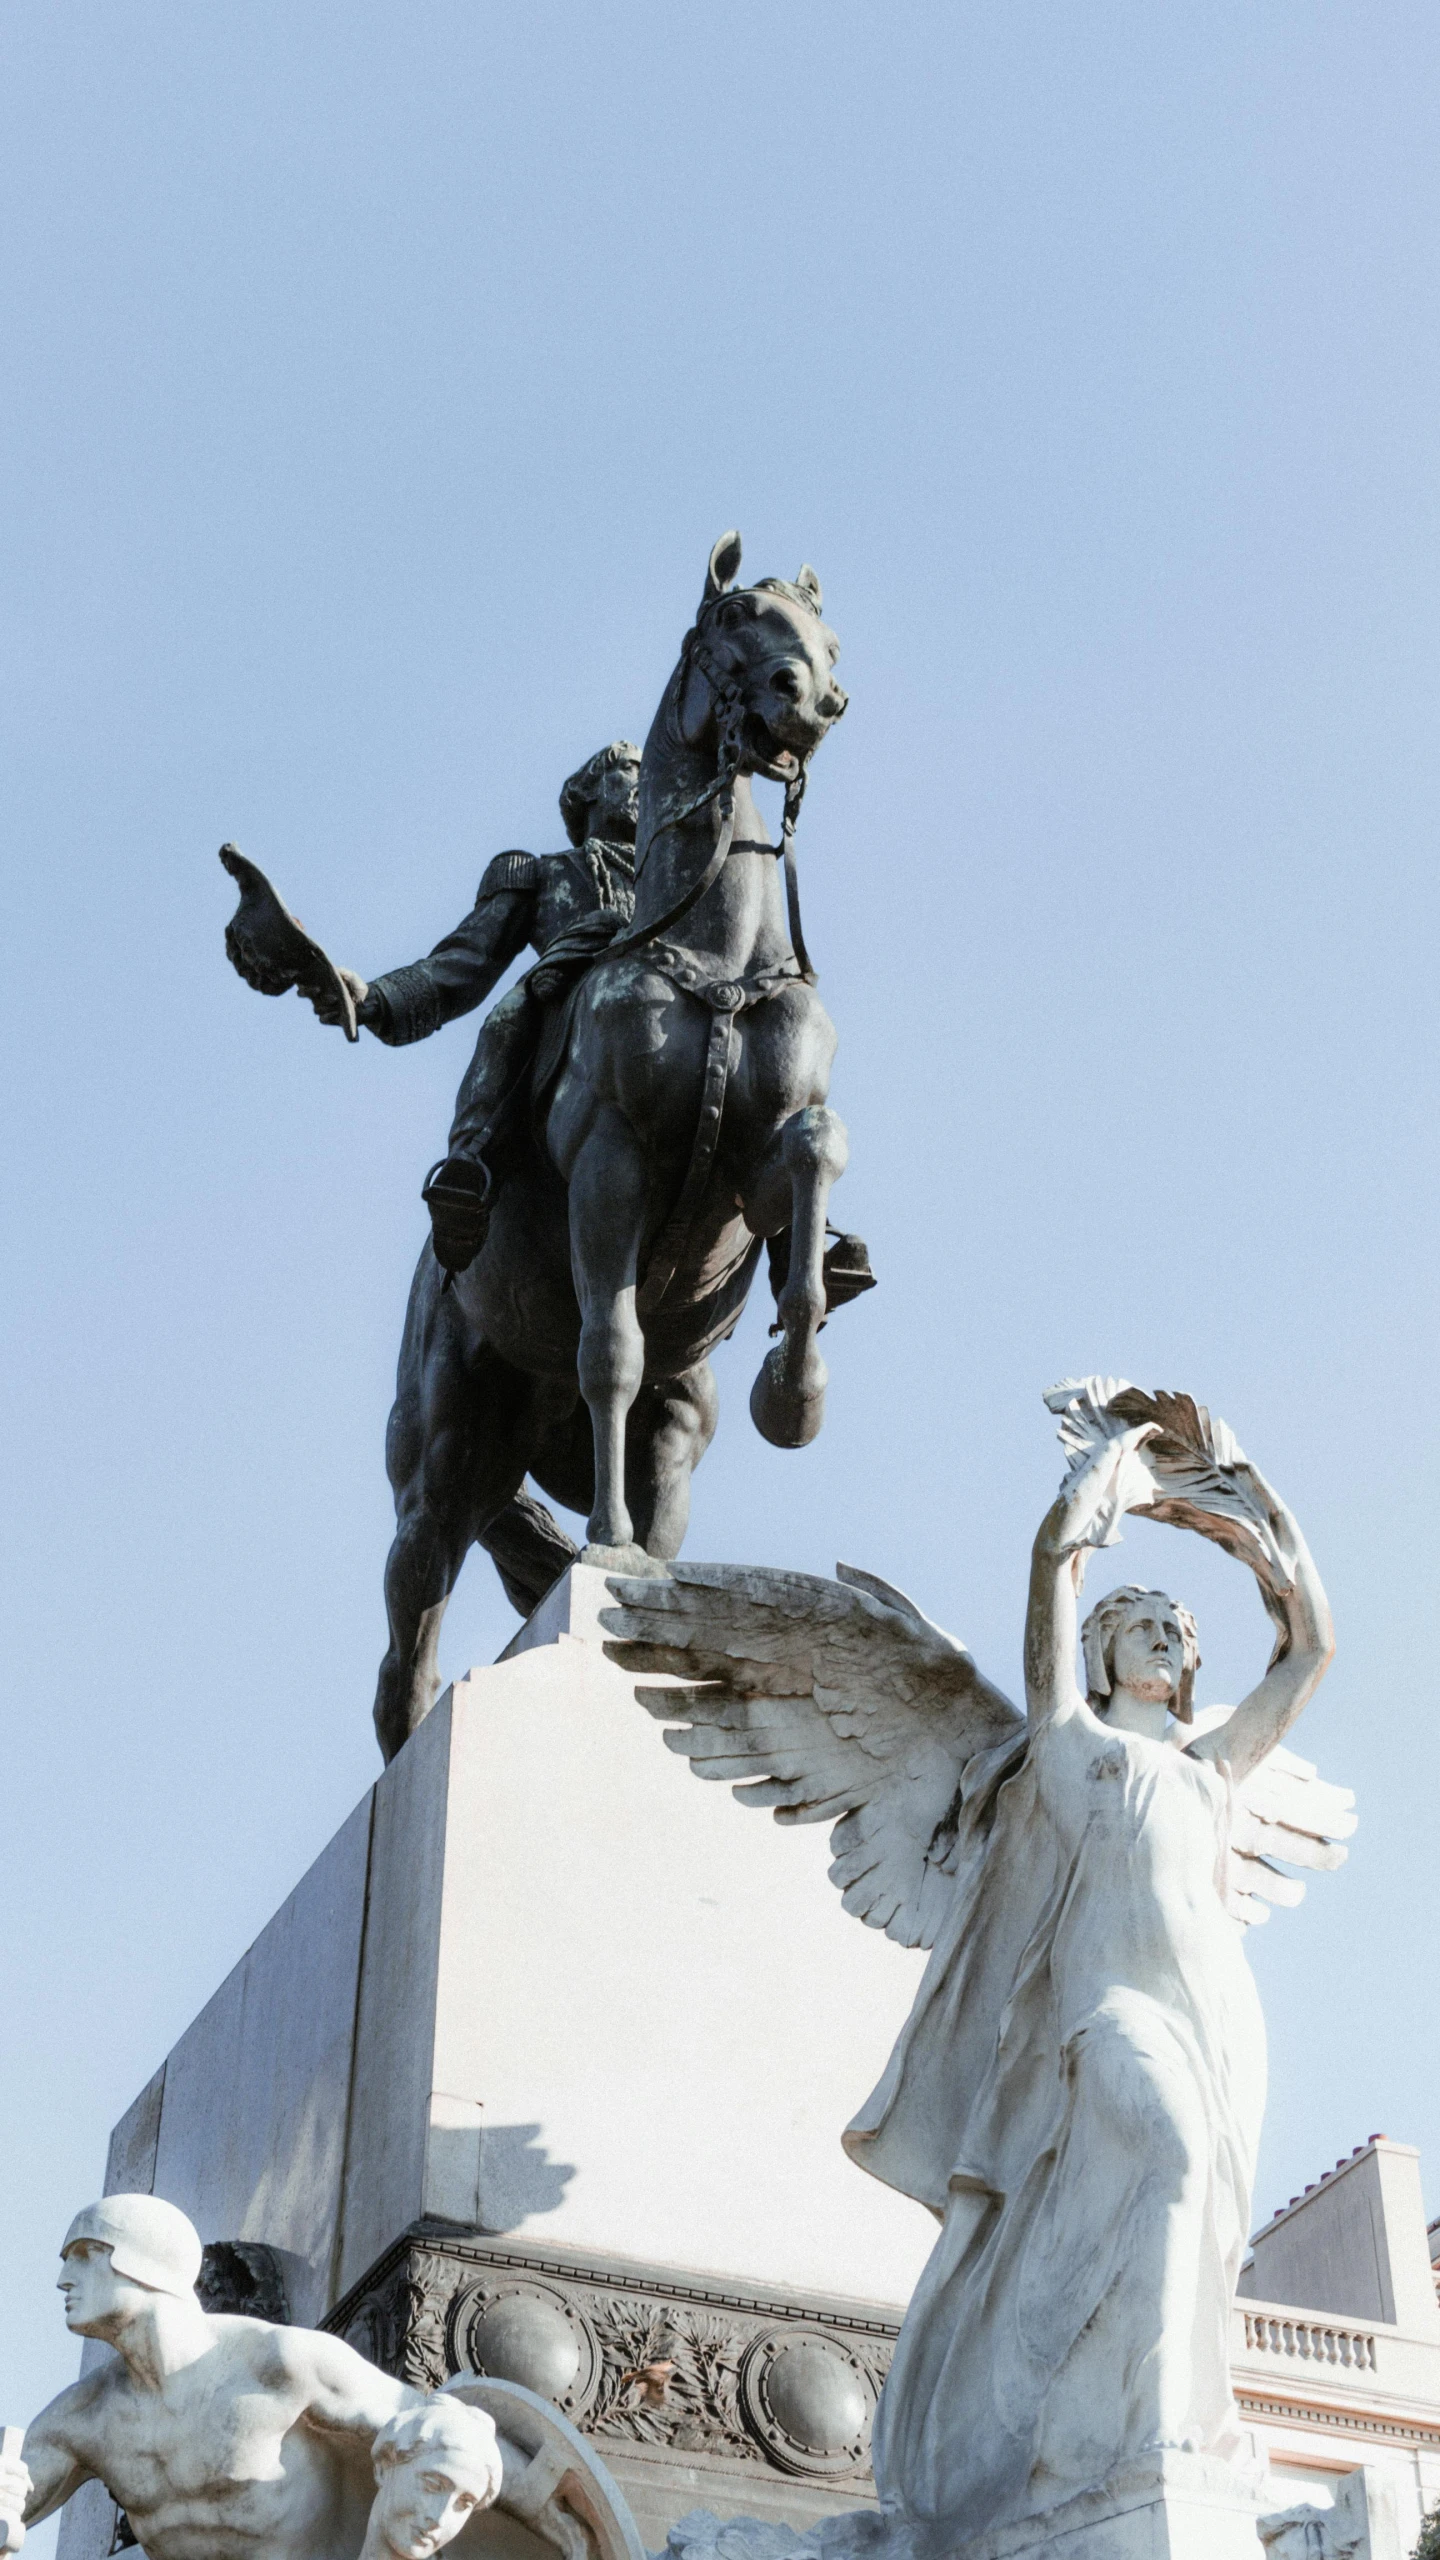 the statue of a man on a horse is in front of a building